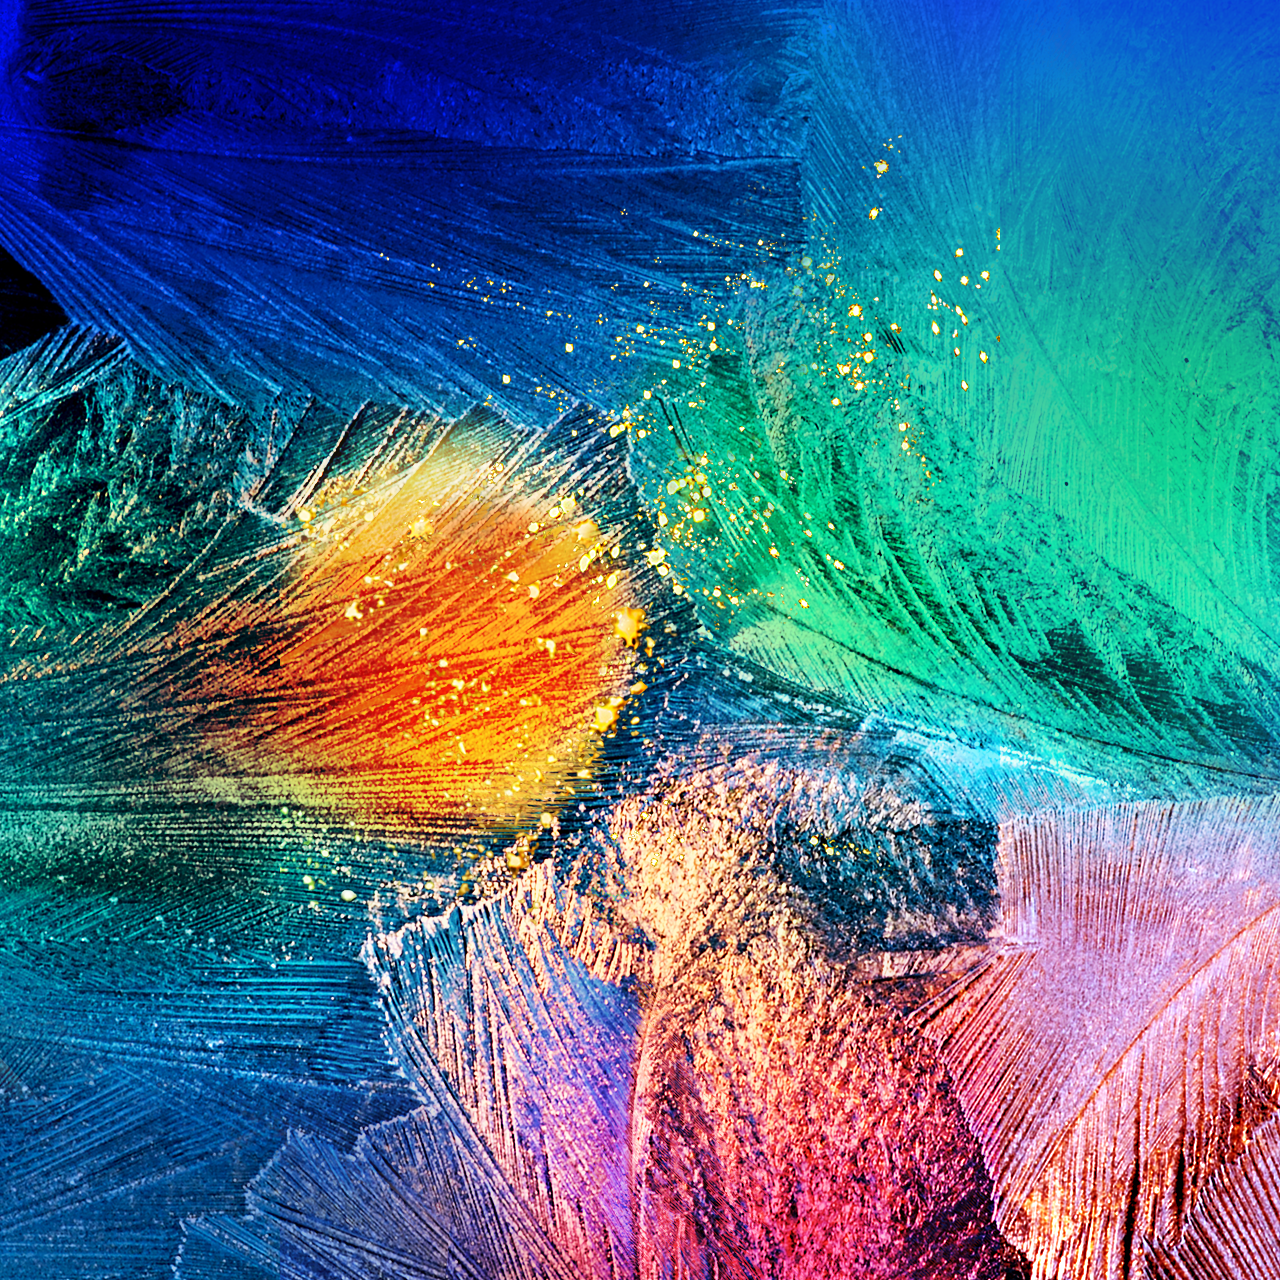 Samsung Galaxy Alpha official wallpapers now available for